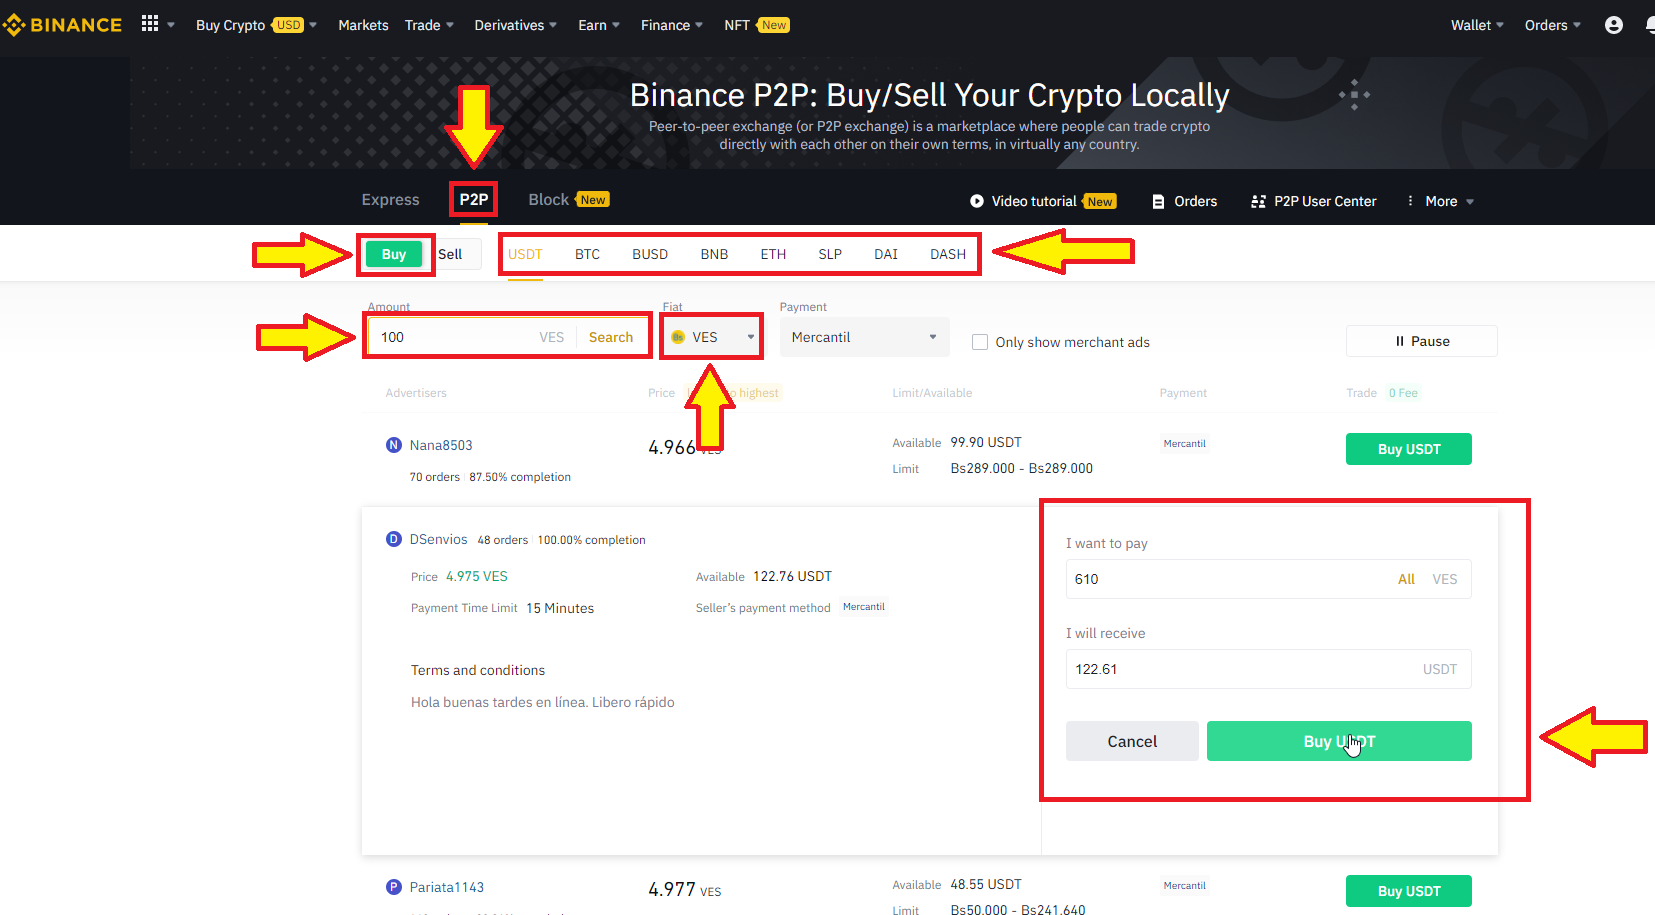 Buy Mirror Protocol crypto in P2P with a verified account on Binance